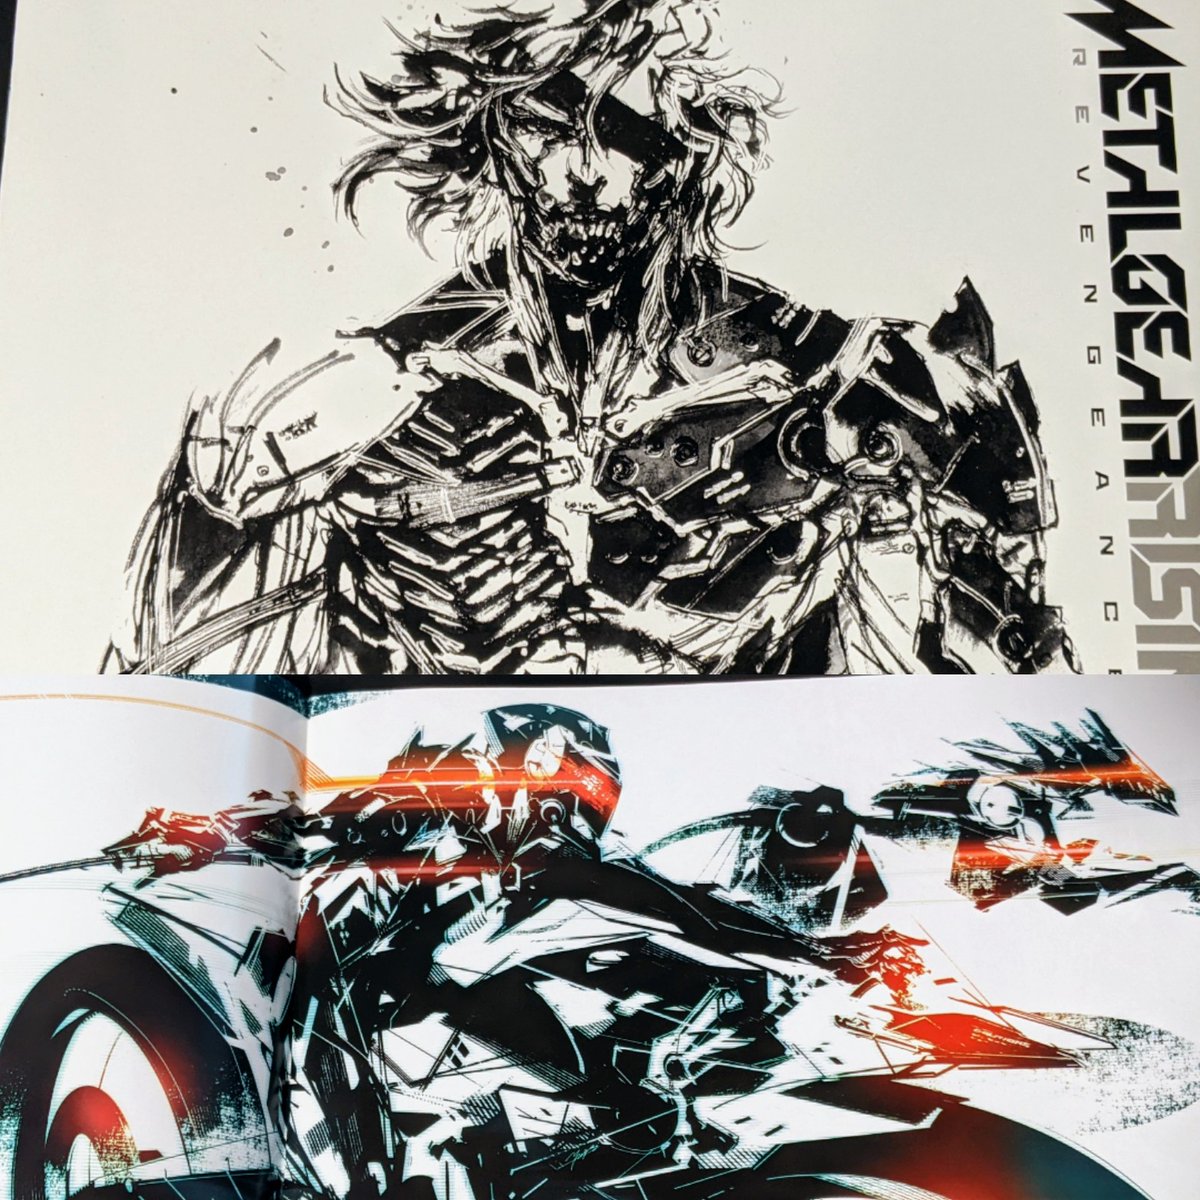 Some pages from the little art book I got for preordering the game way back when. Love love love Shinkawa's work. I feel like some of these were concepts for the game when it was still about the Area 51 stuff 
Also the Revo Raiden. What a shame we never got a Wolf to go with him 